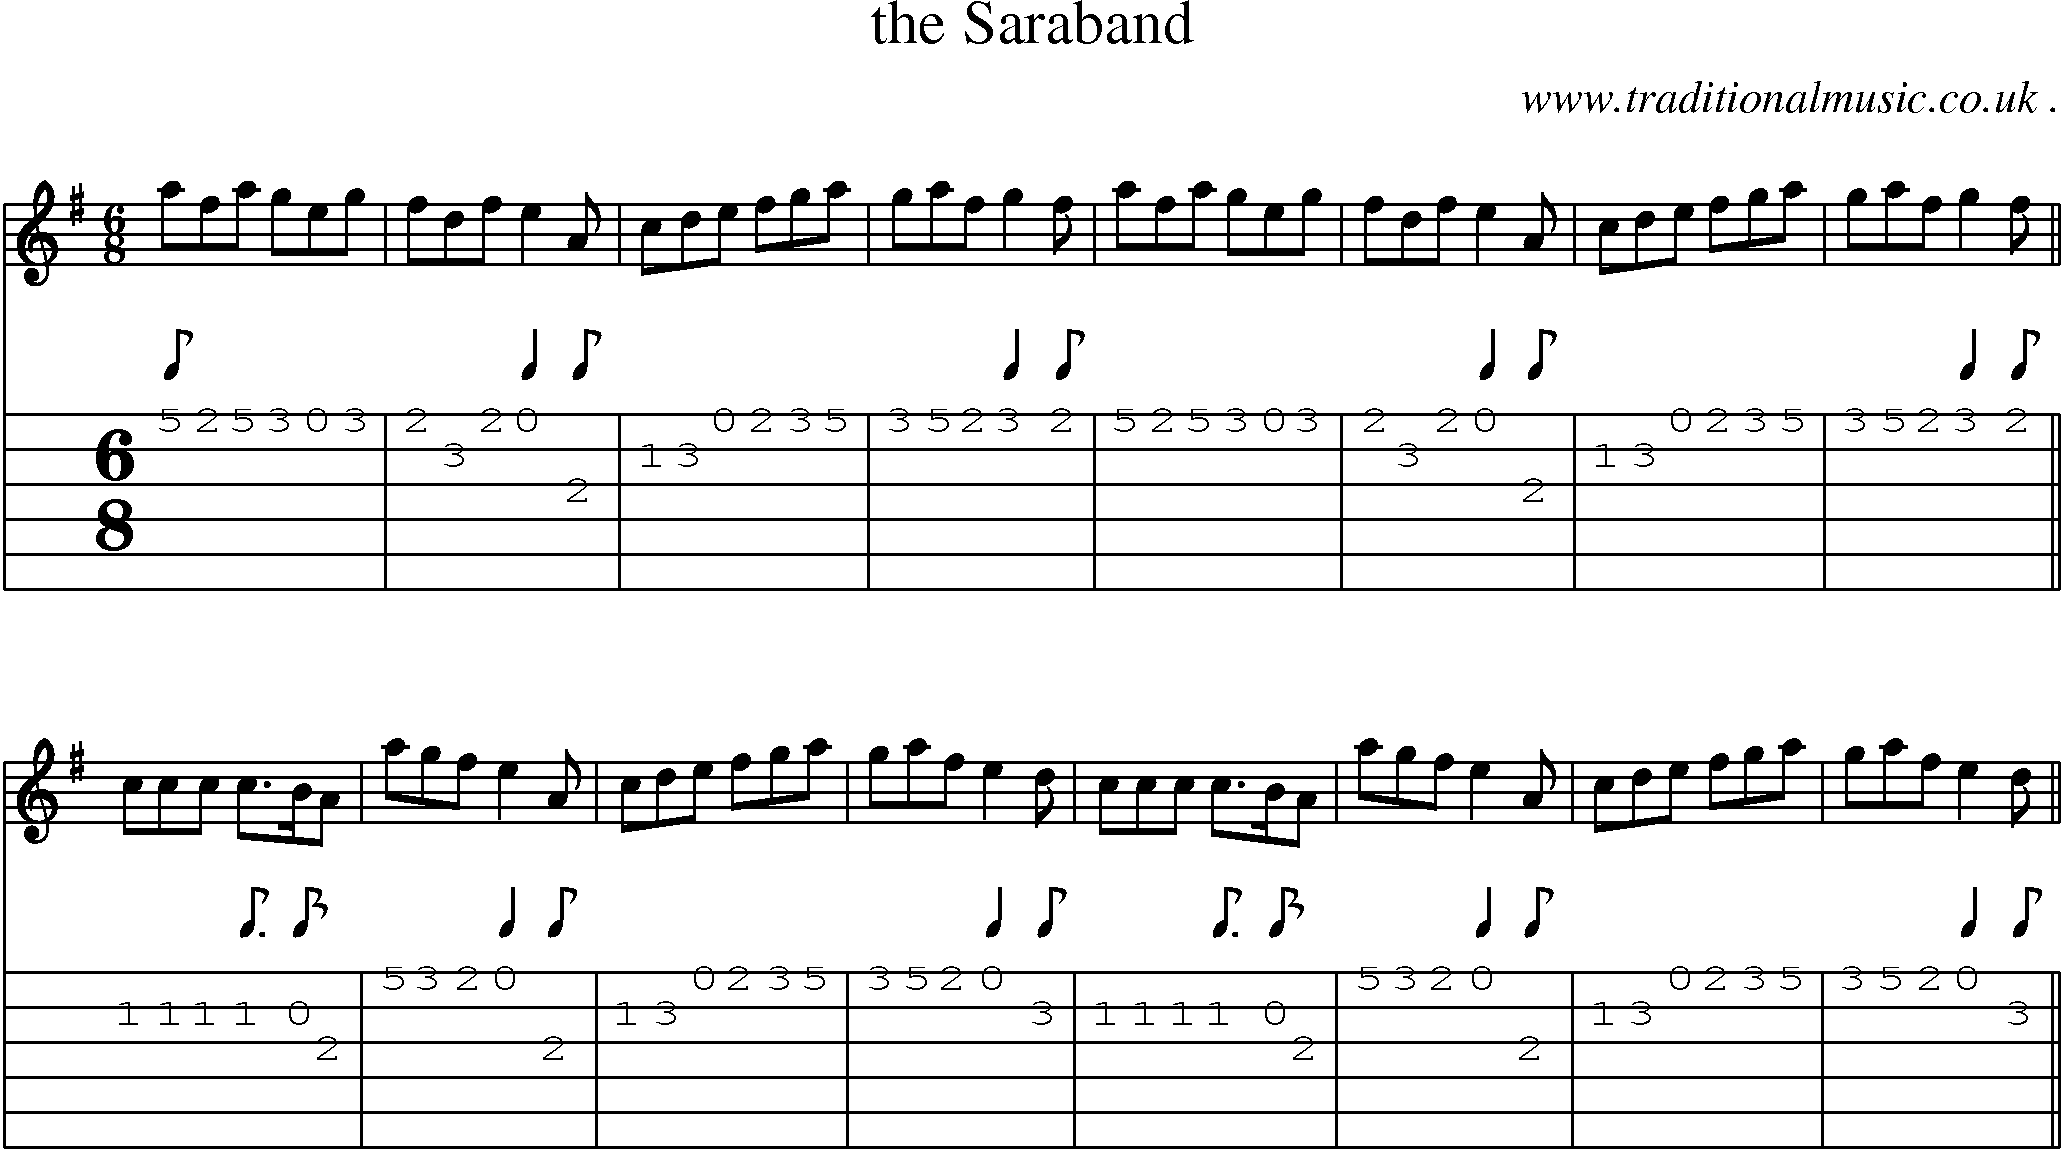 Sheet-music  score, Chords and Guitar Tabs for The Saraband